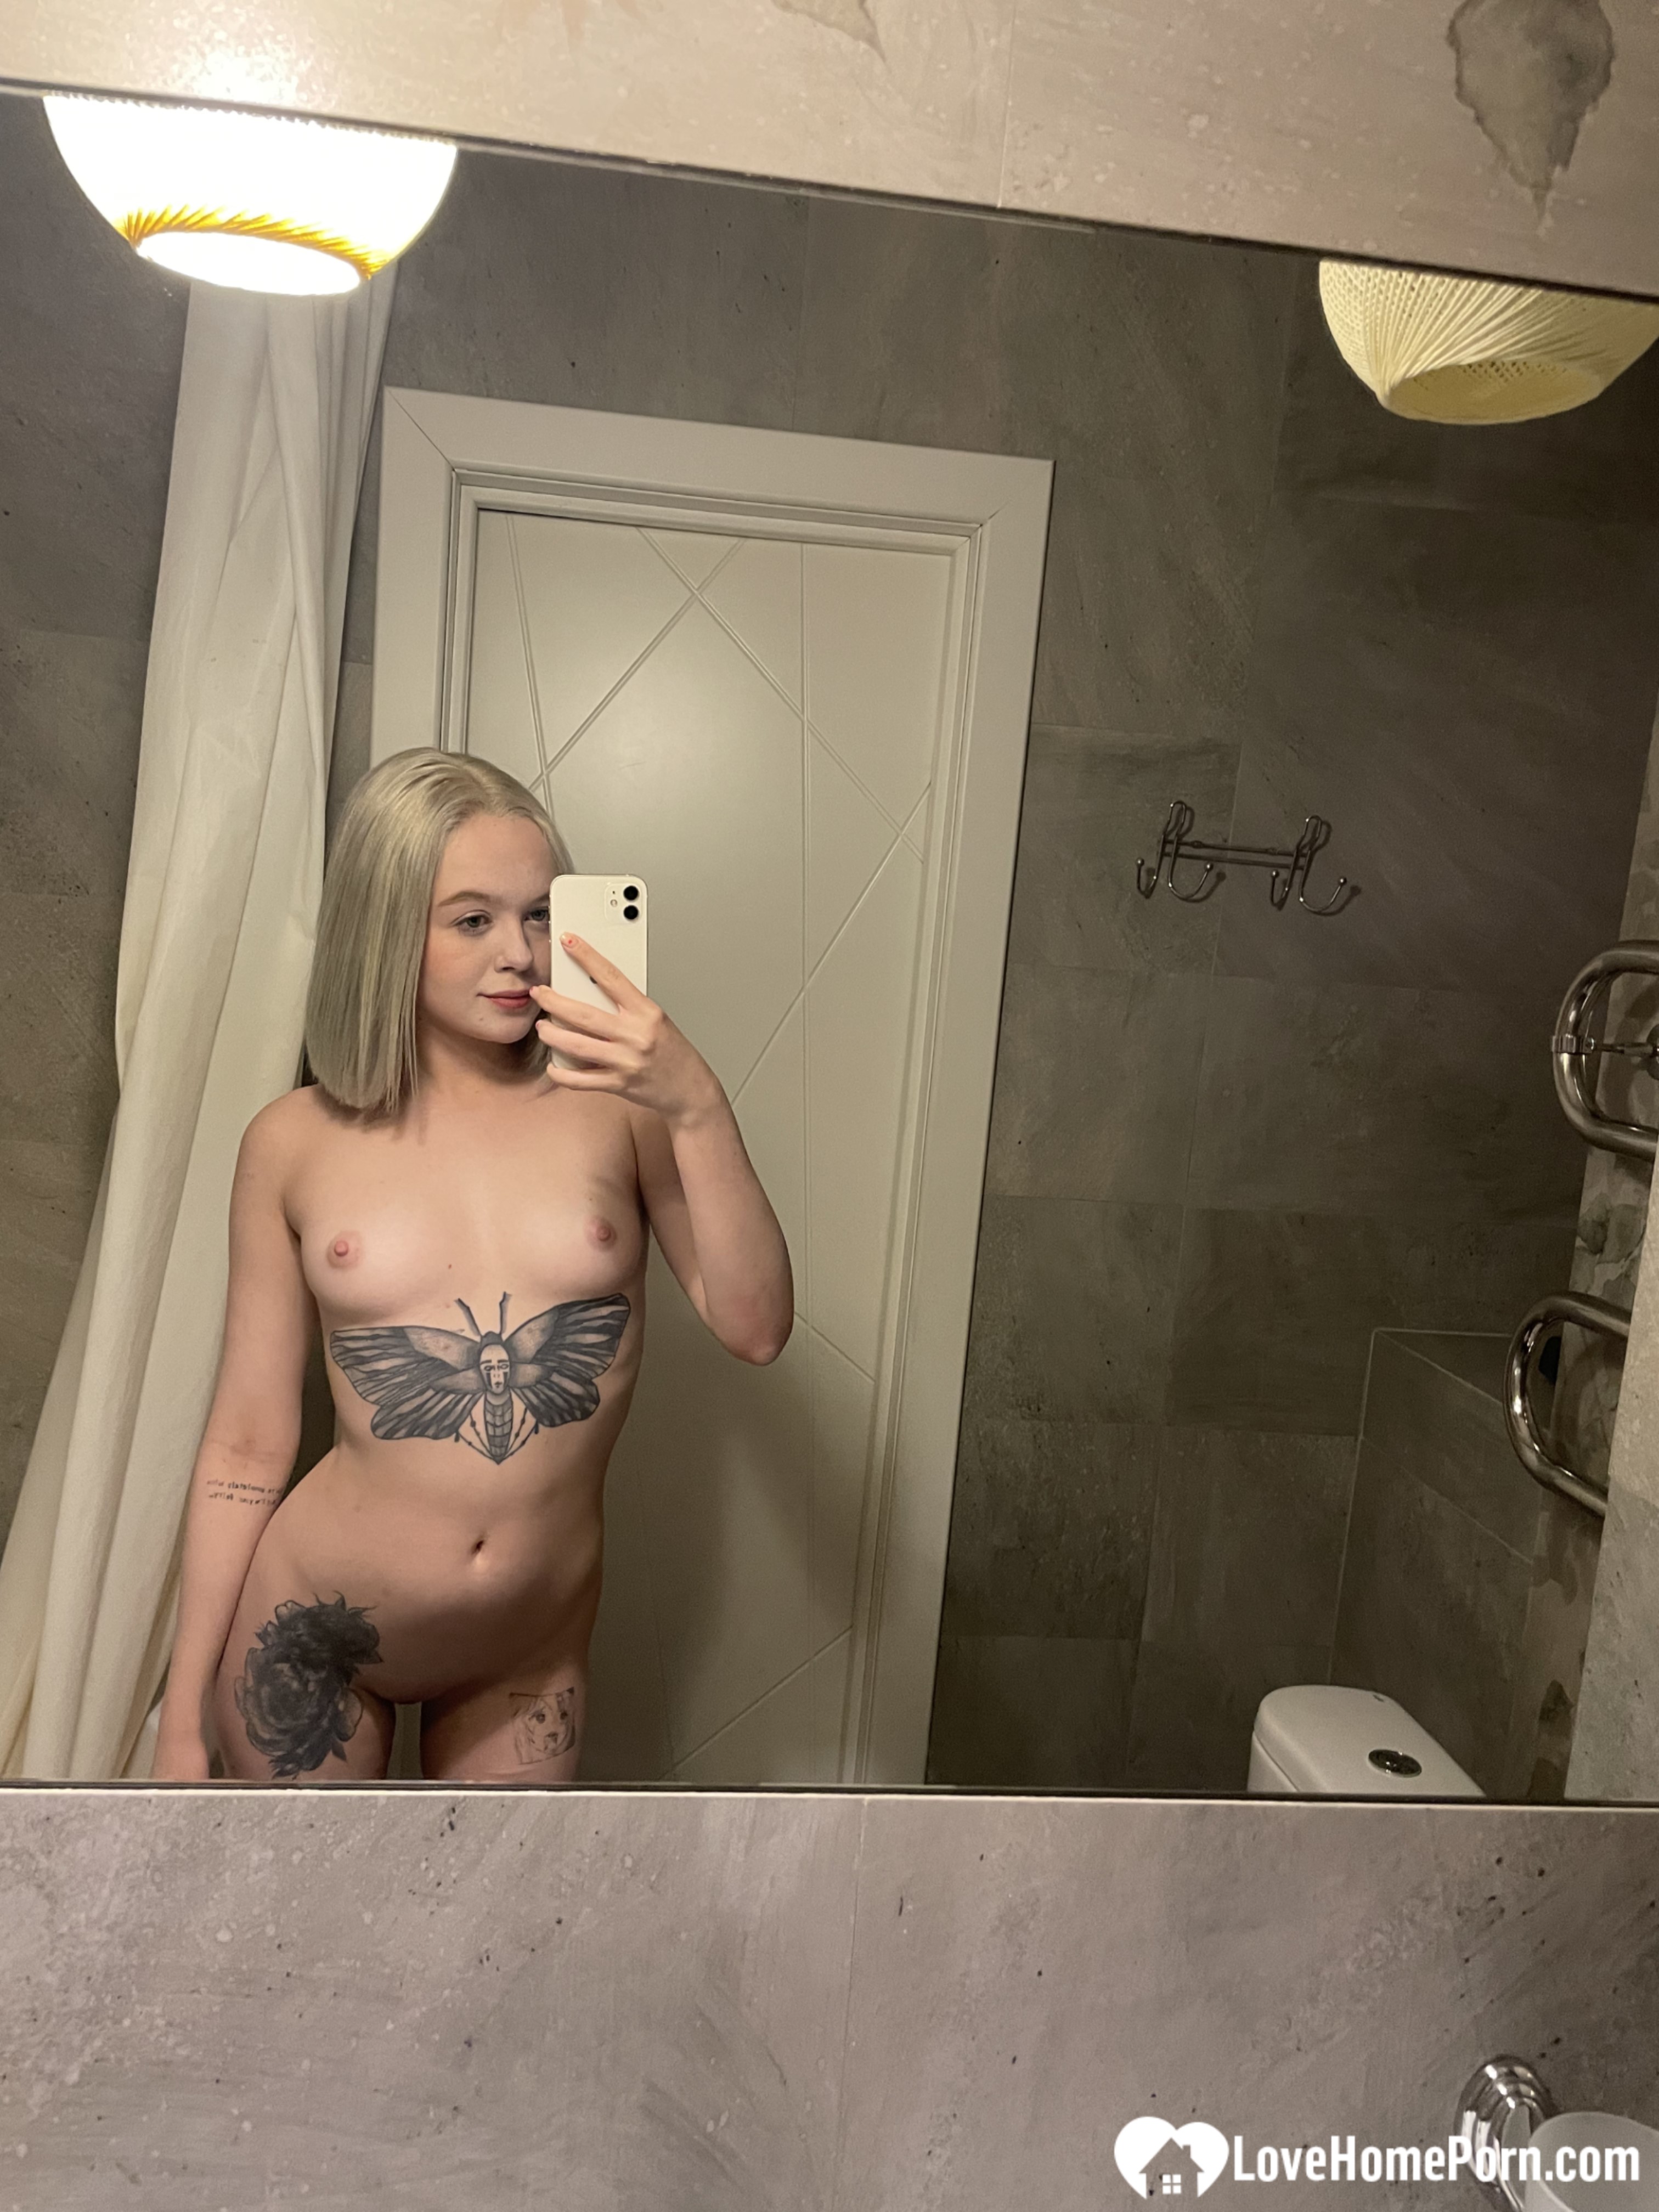 Tattooed blonde showing off her sexy tattoos